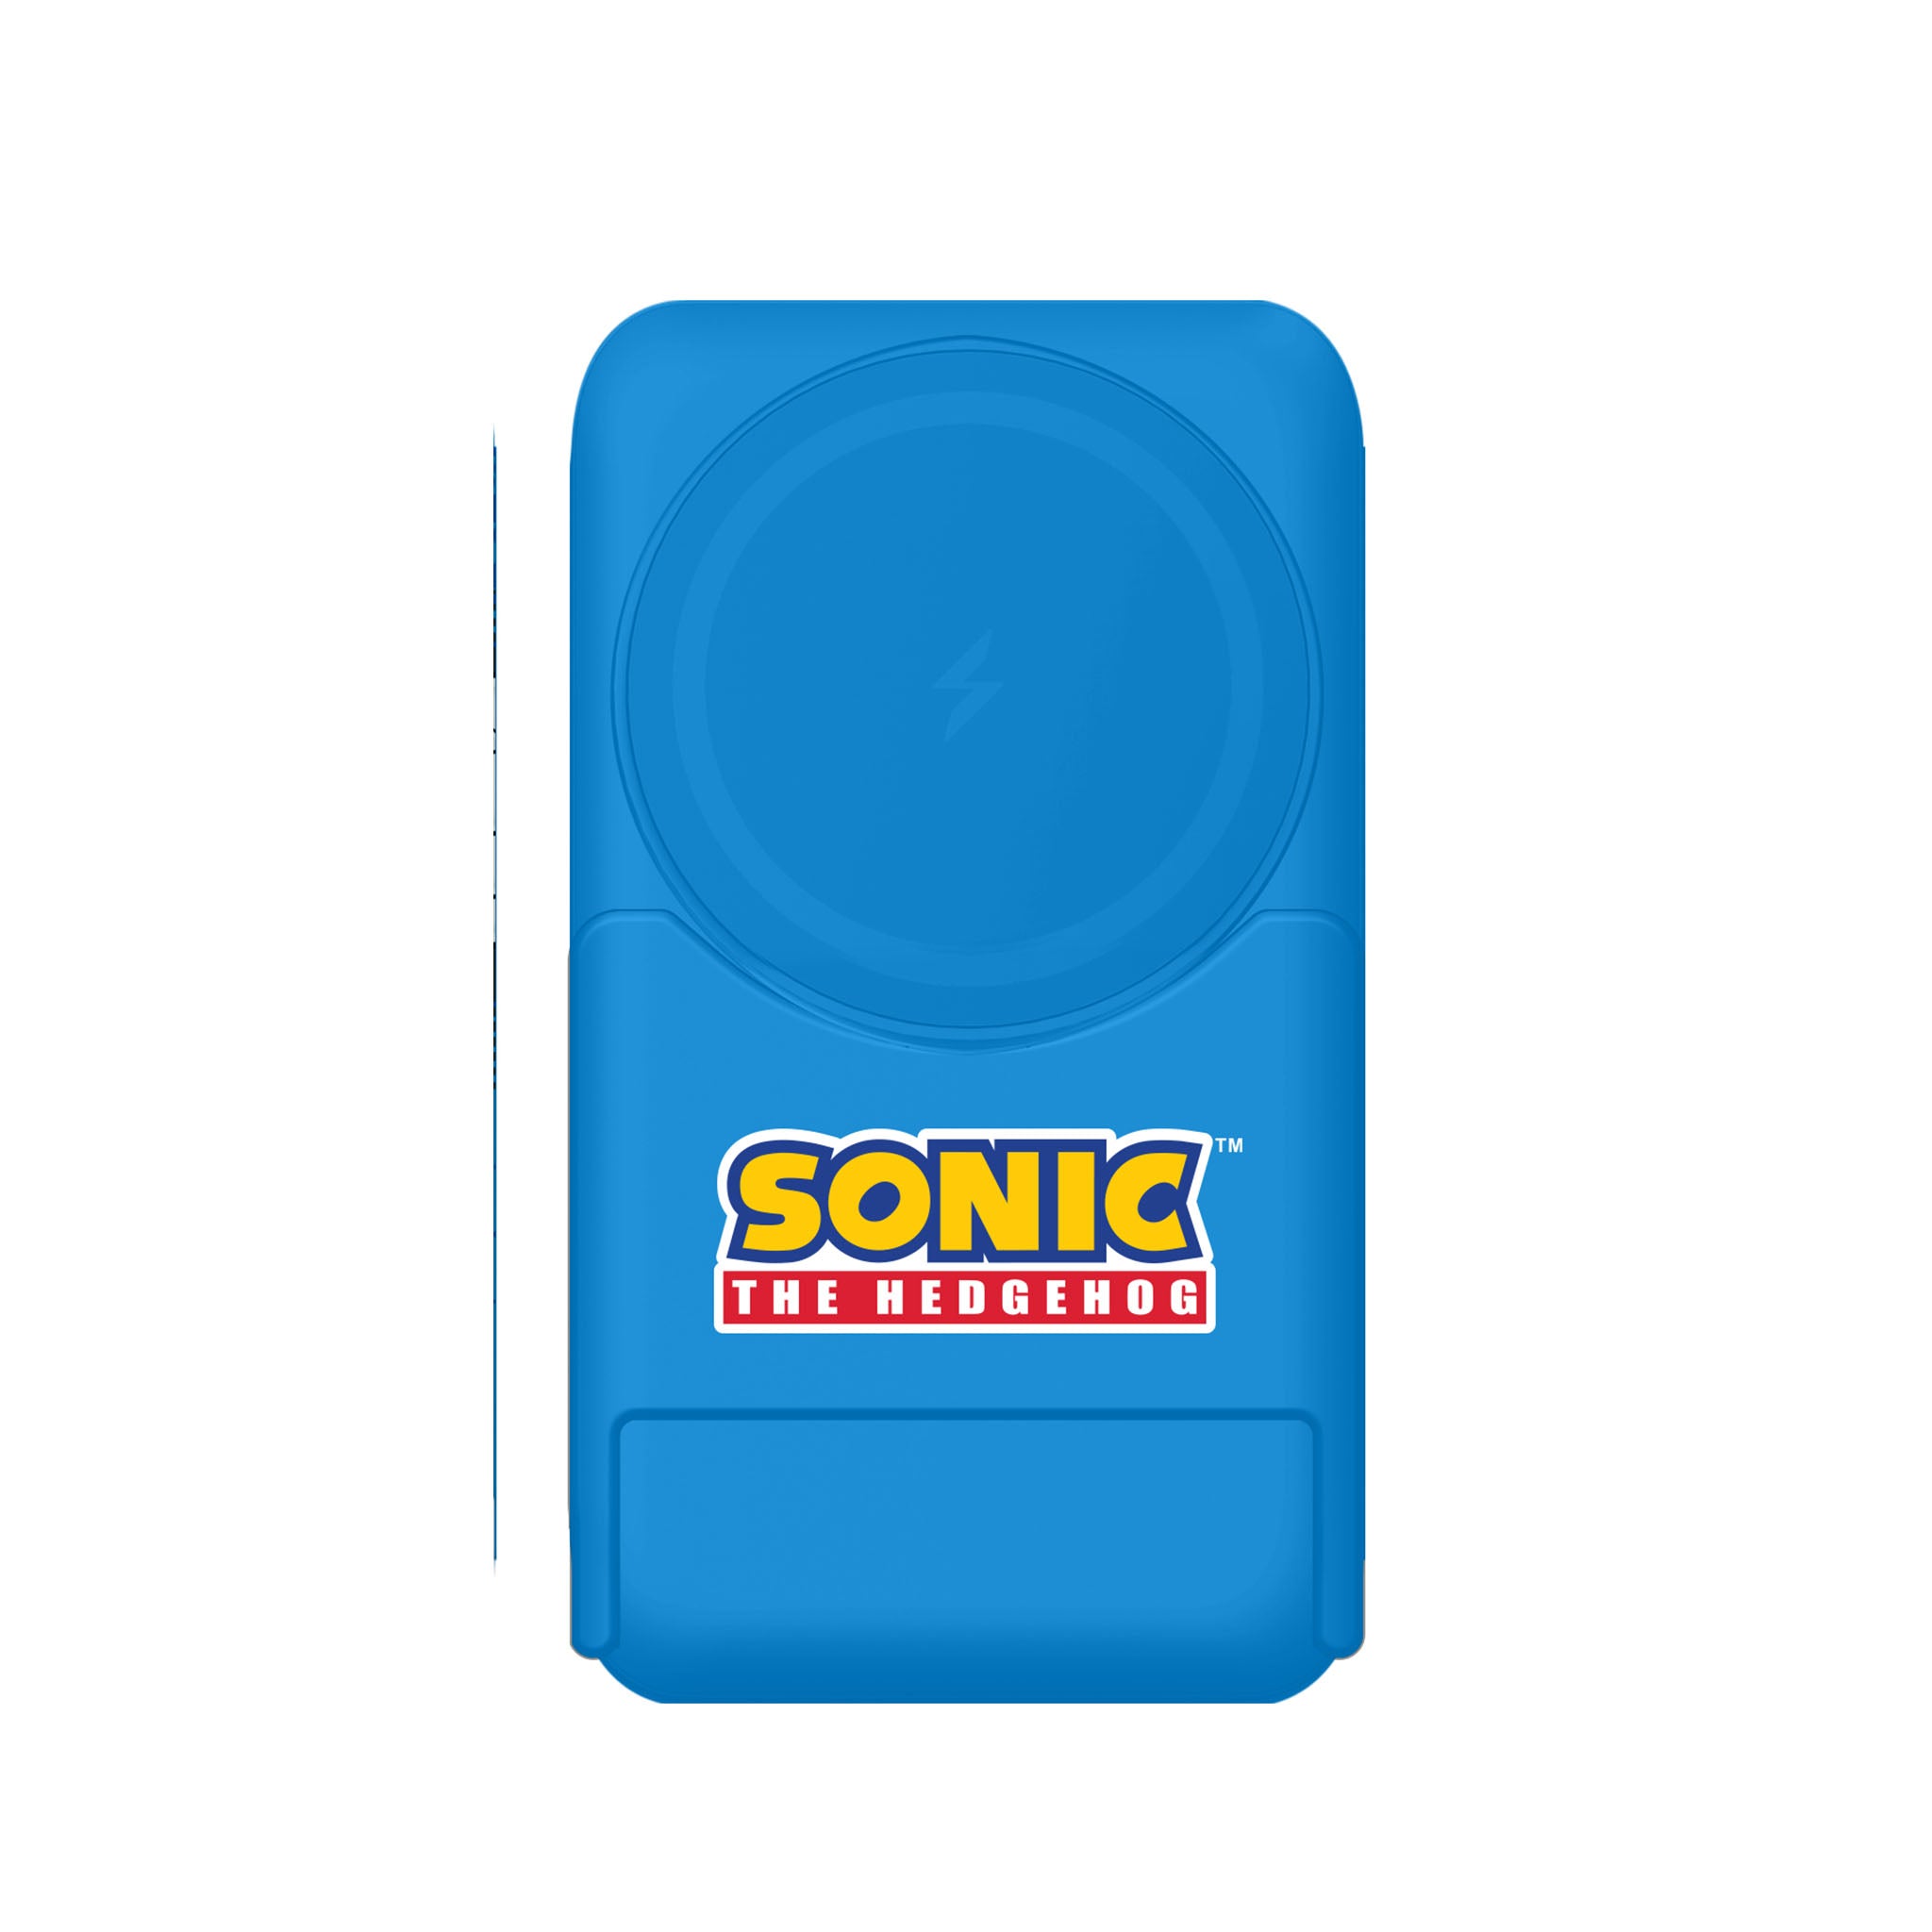 Sonic the Hedgehog Magnetic Wireless Power bank